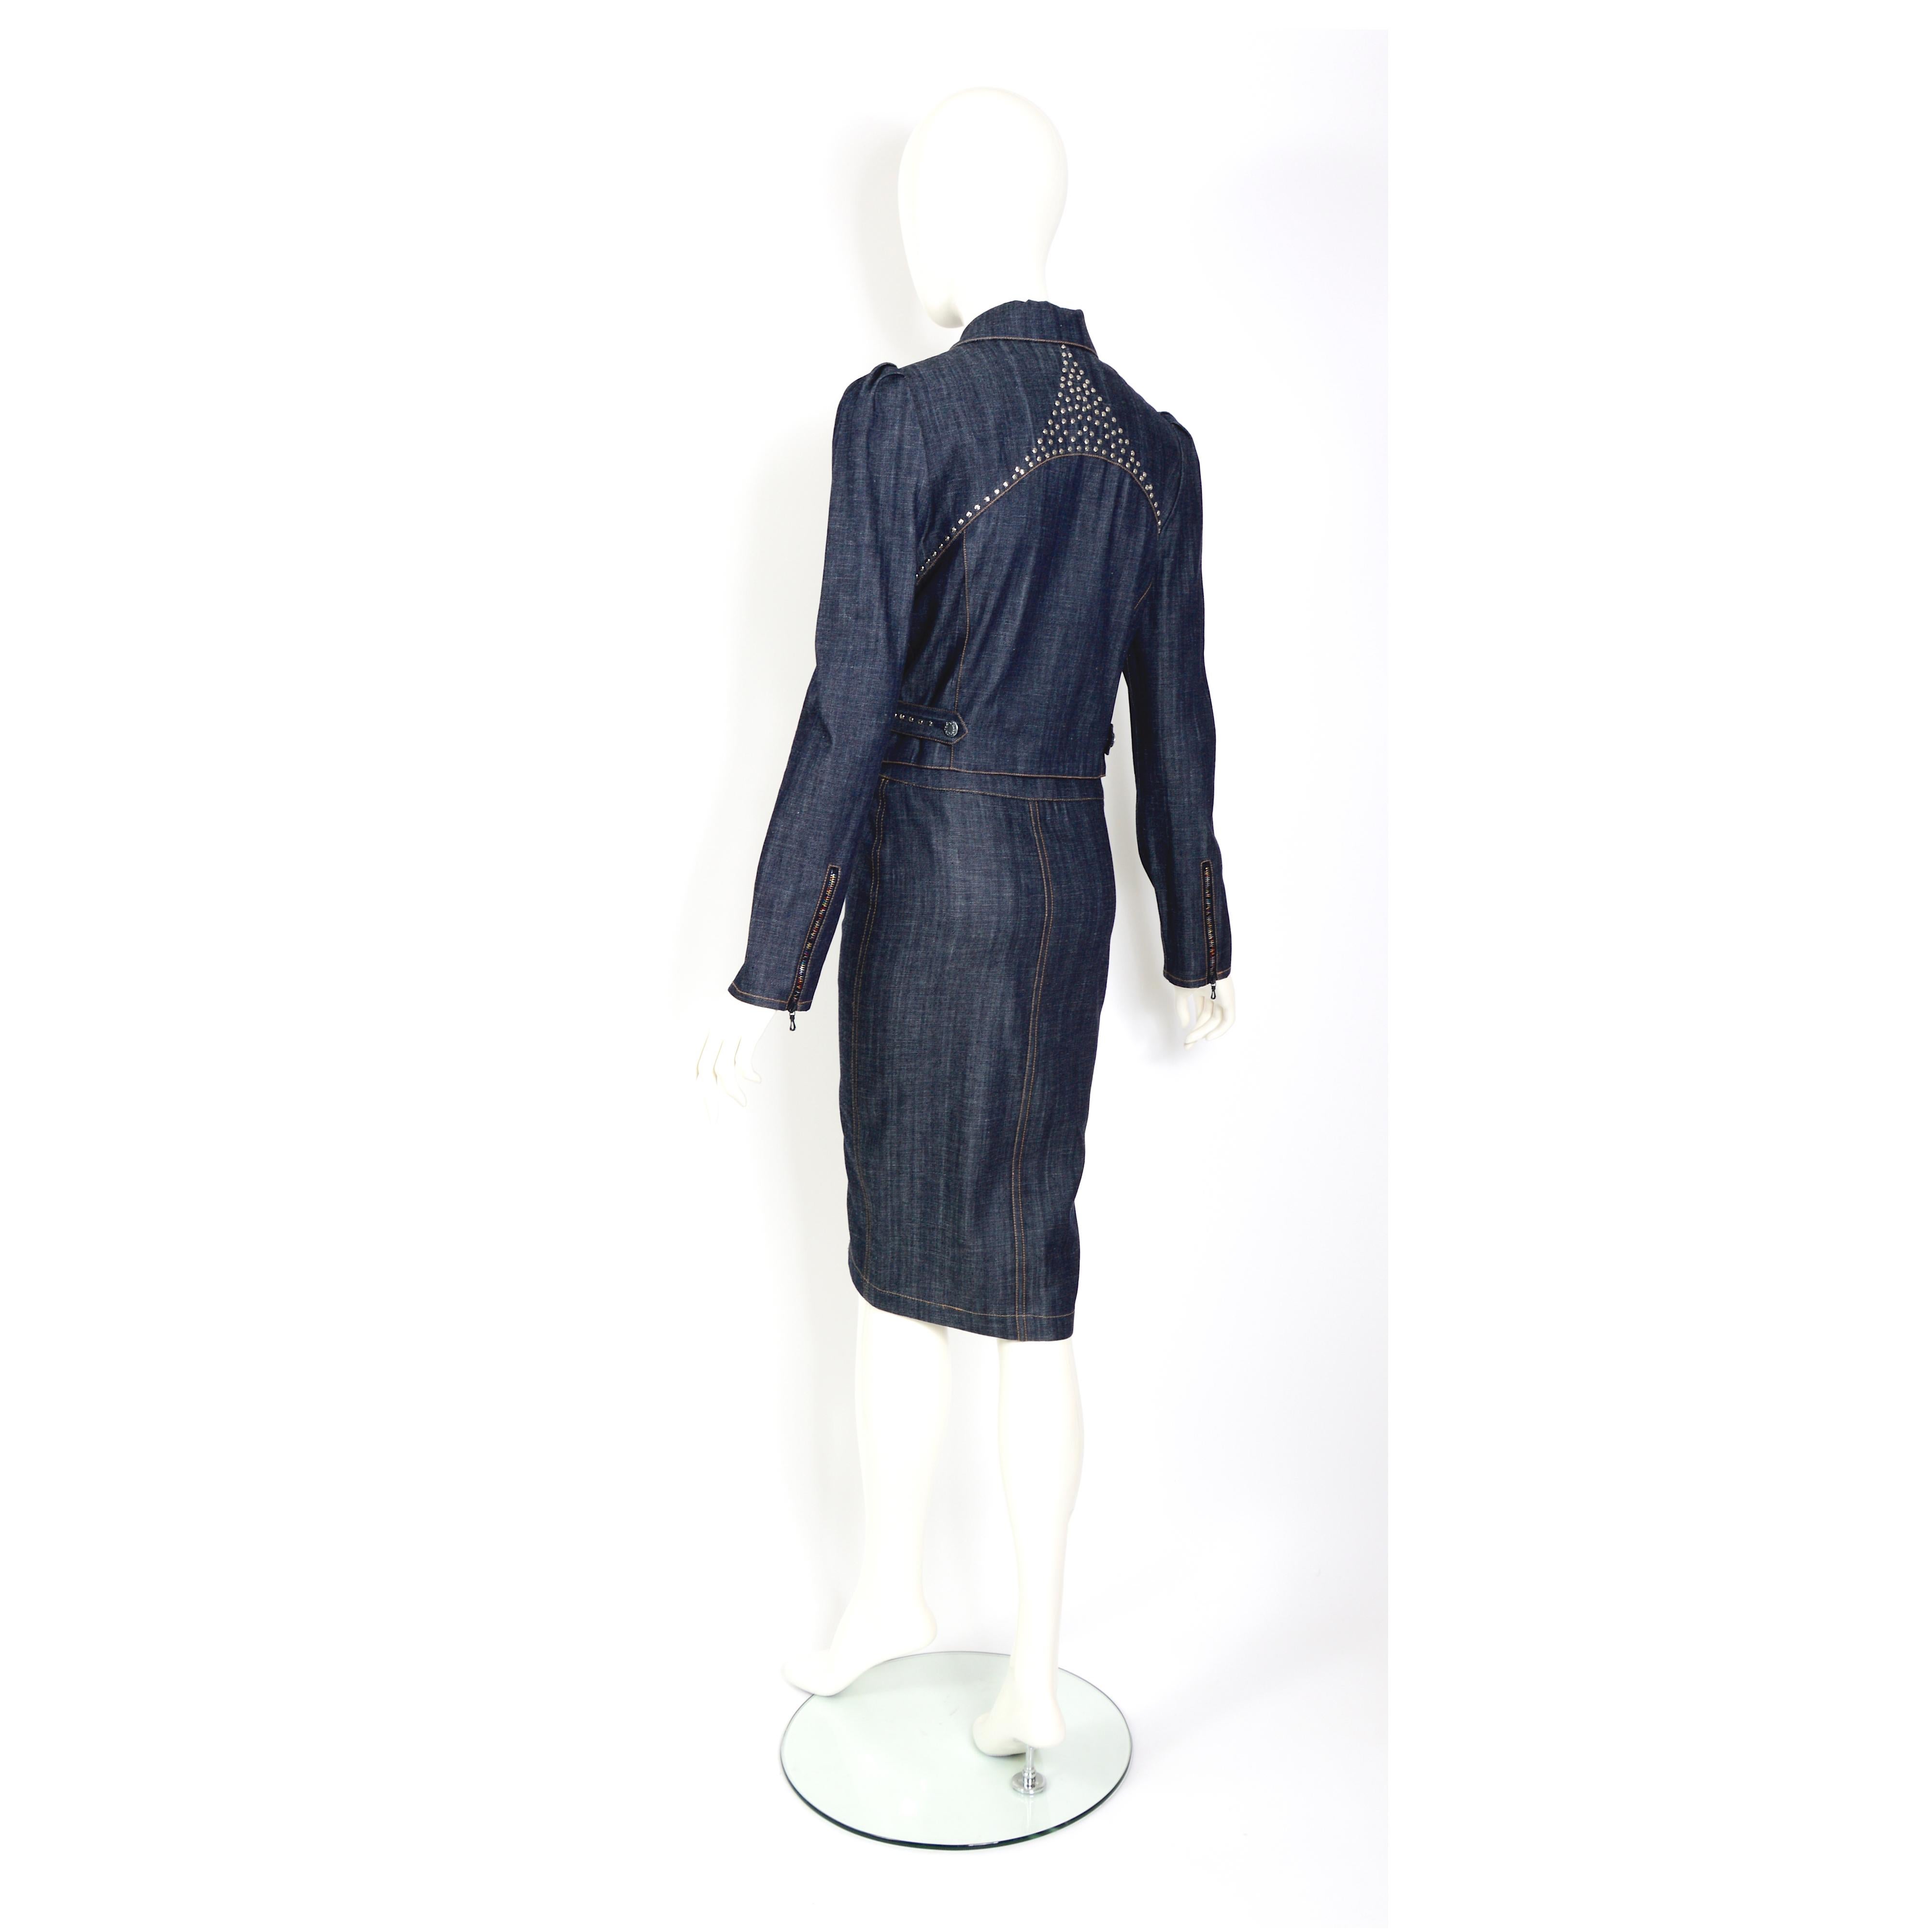 Chloé by Stella McCartney vintage 2001 denim jacket and skirt set In Excellent Condition For Sale In Antwerp, BE